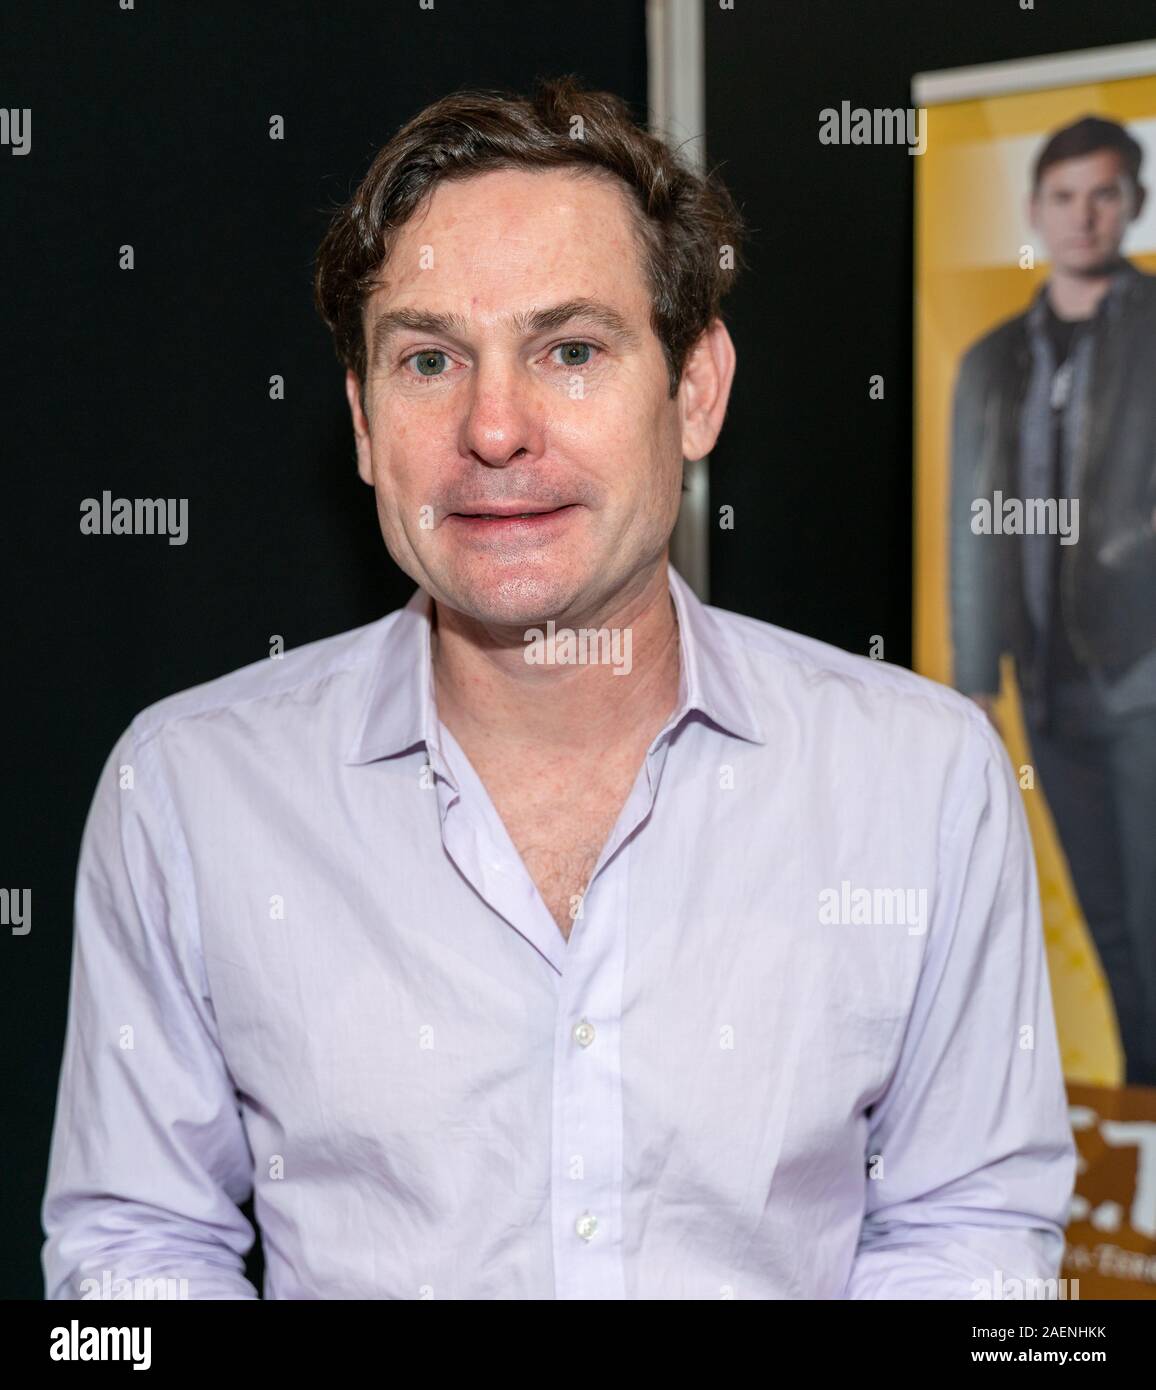 DORTMUND, GERMANY - December 8th 2019: Henry Thomas (*1971, American actor and musician - E.T., Haunting, Psycho IV) at German Comic Con Dortmund, a two day fan convention Stock Photo